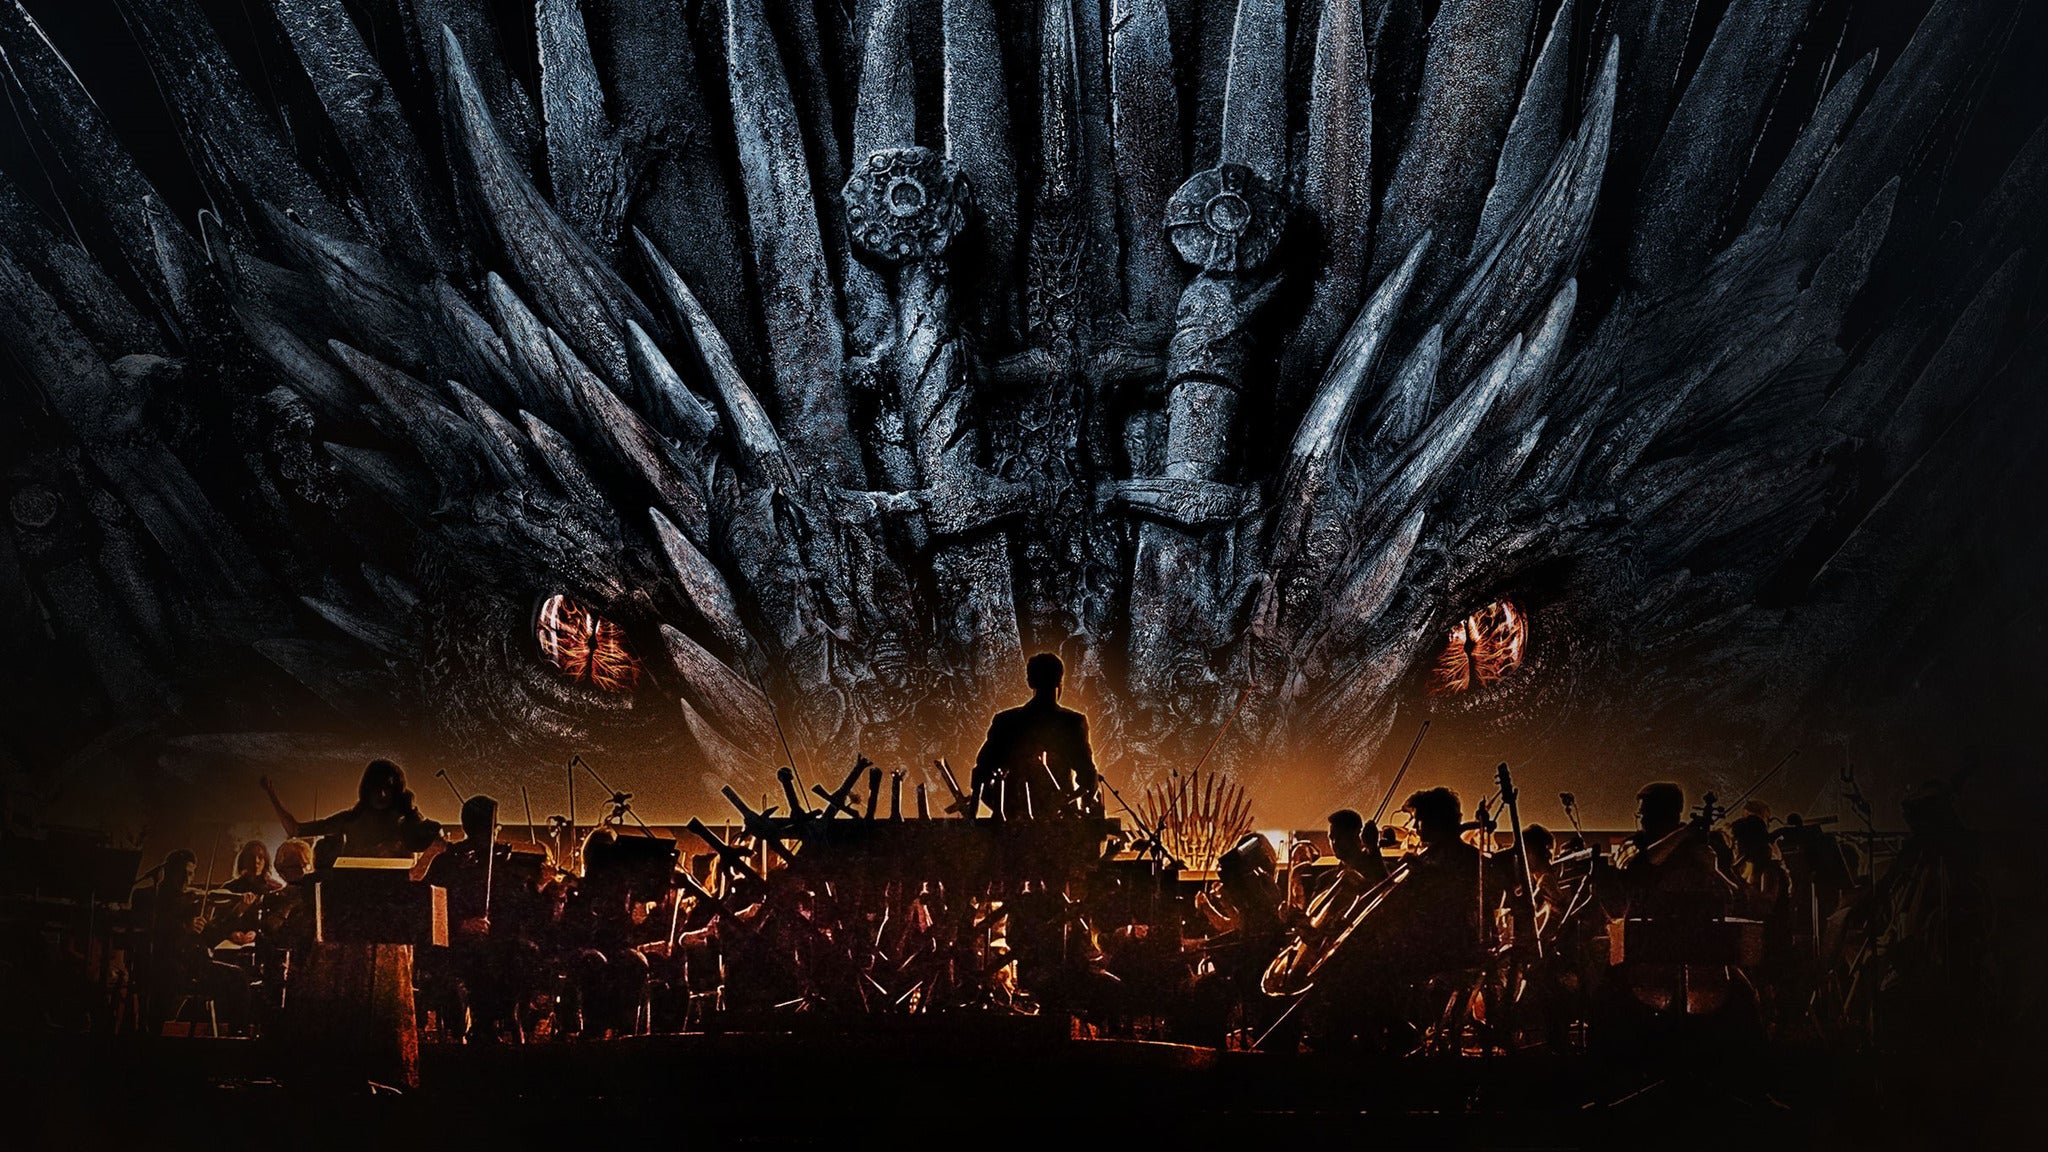 Game of Thrones Live Concert Experience in Dallas promo photo for 3D Collector Ticket presale offer code